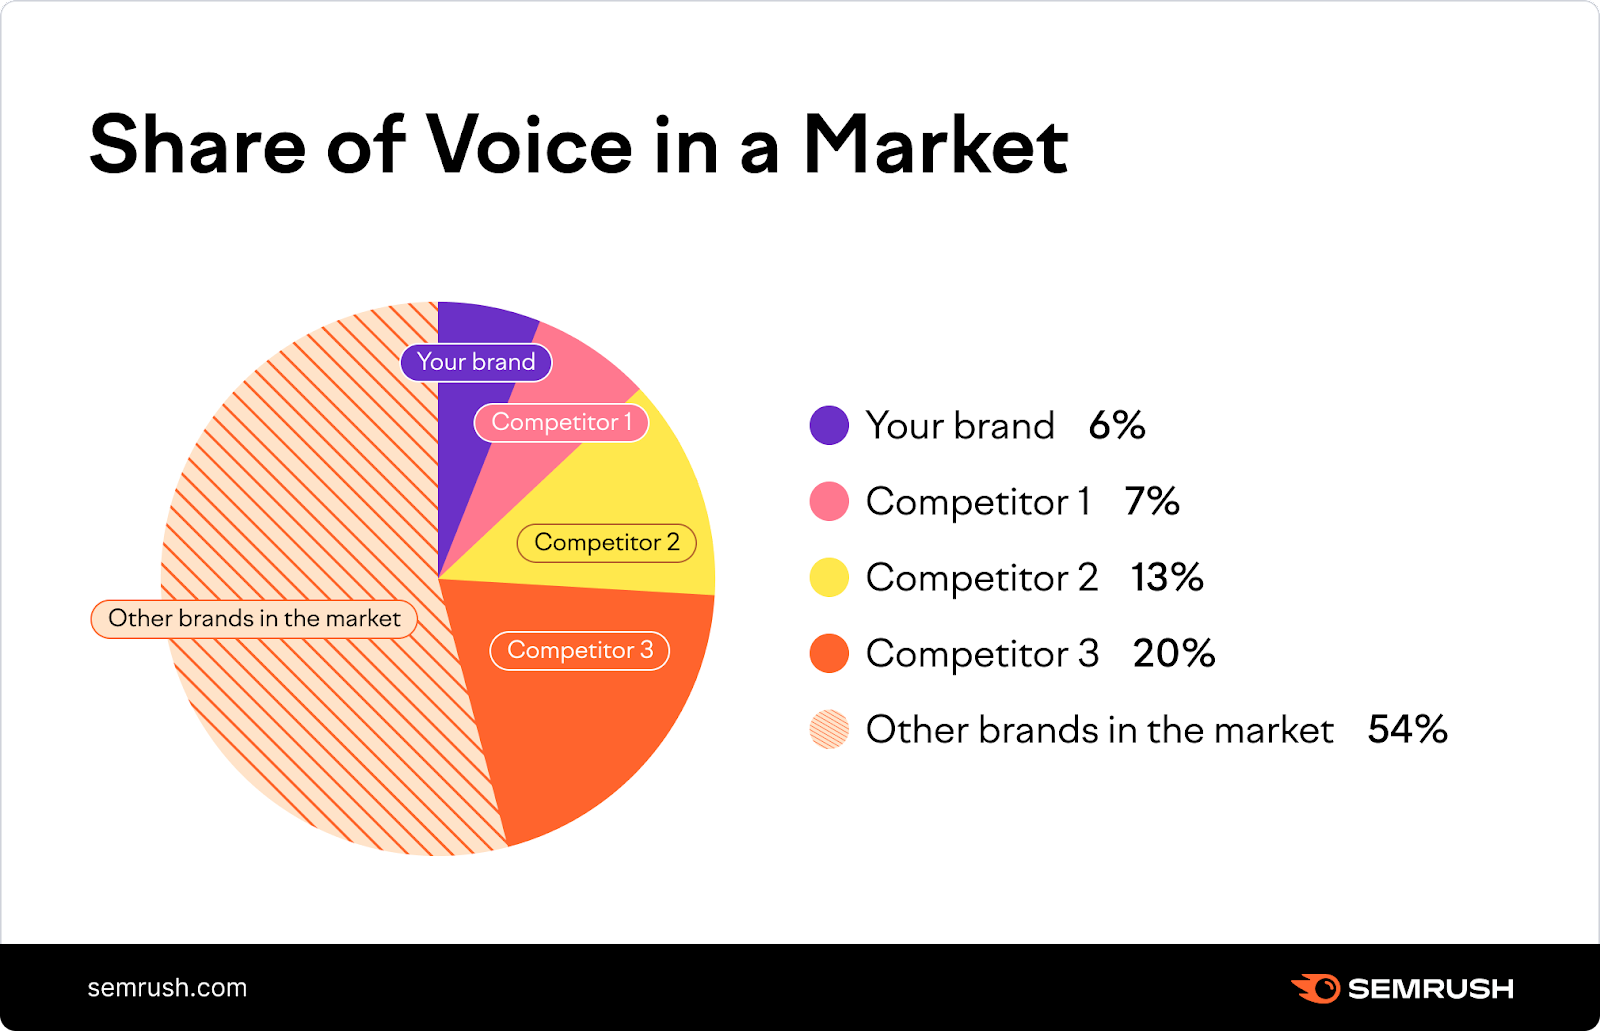 Share of voice in a market is like a pie chart with your brand and other brands taking a percentage of the market